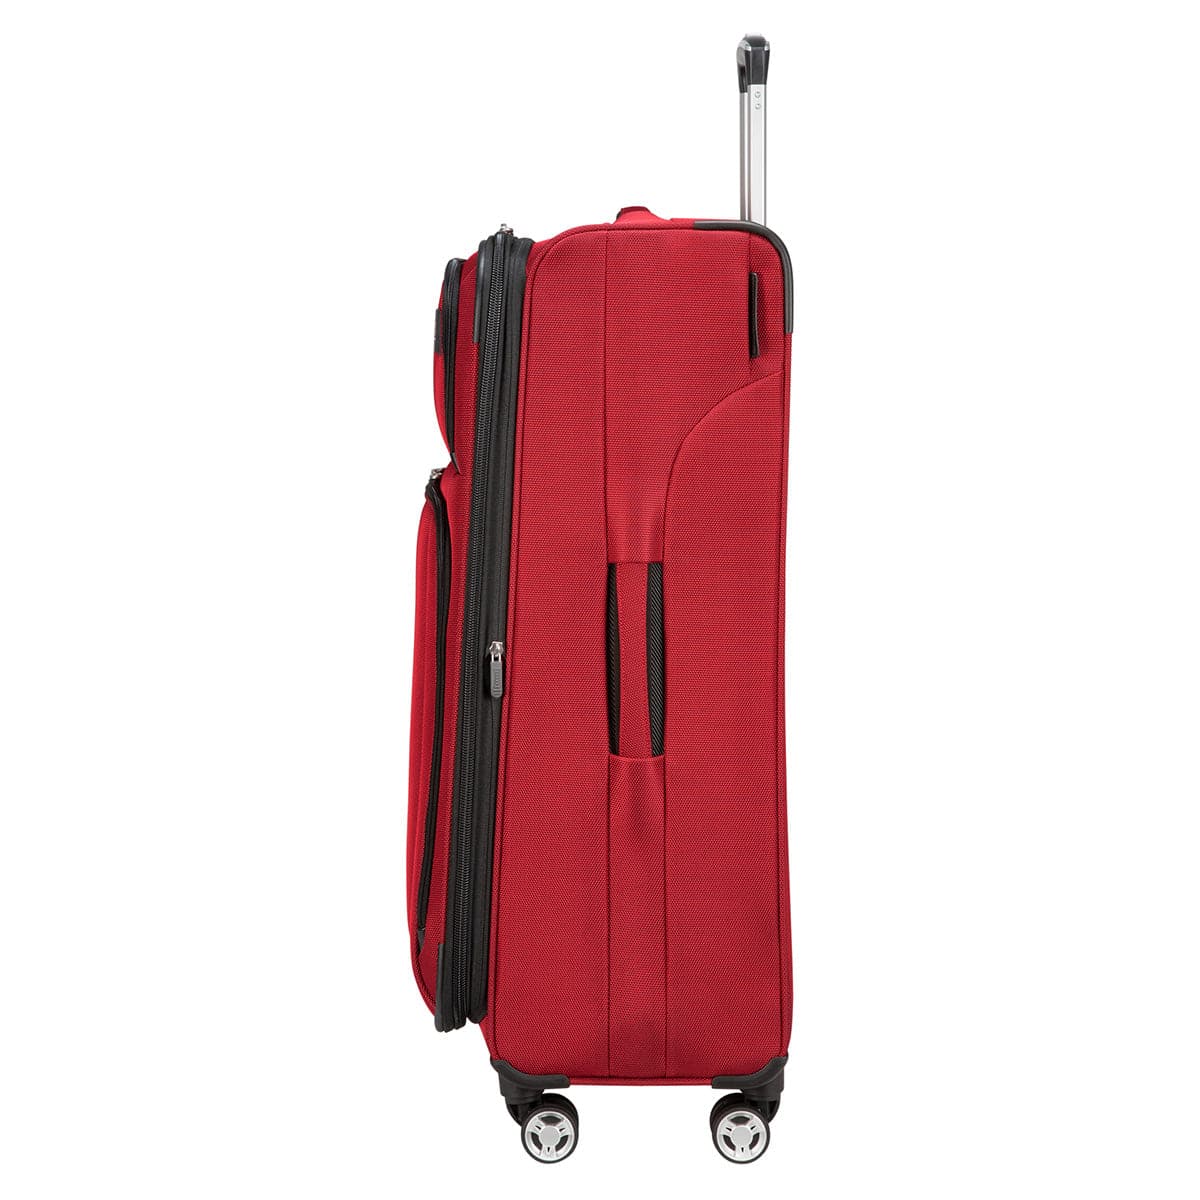 Skyway Sigma 6.0 Softside Large Check-In Luggage